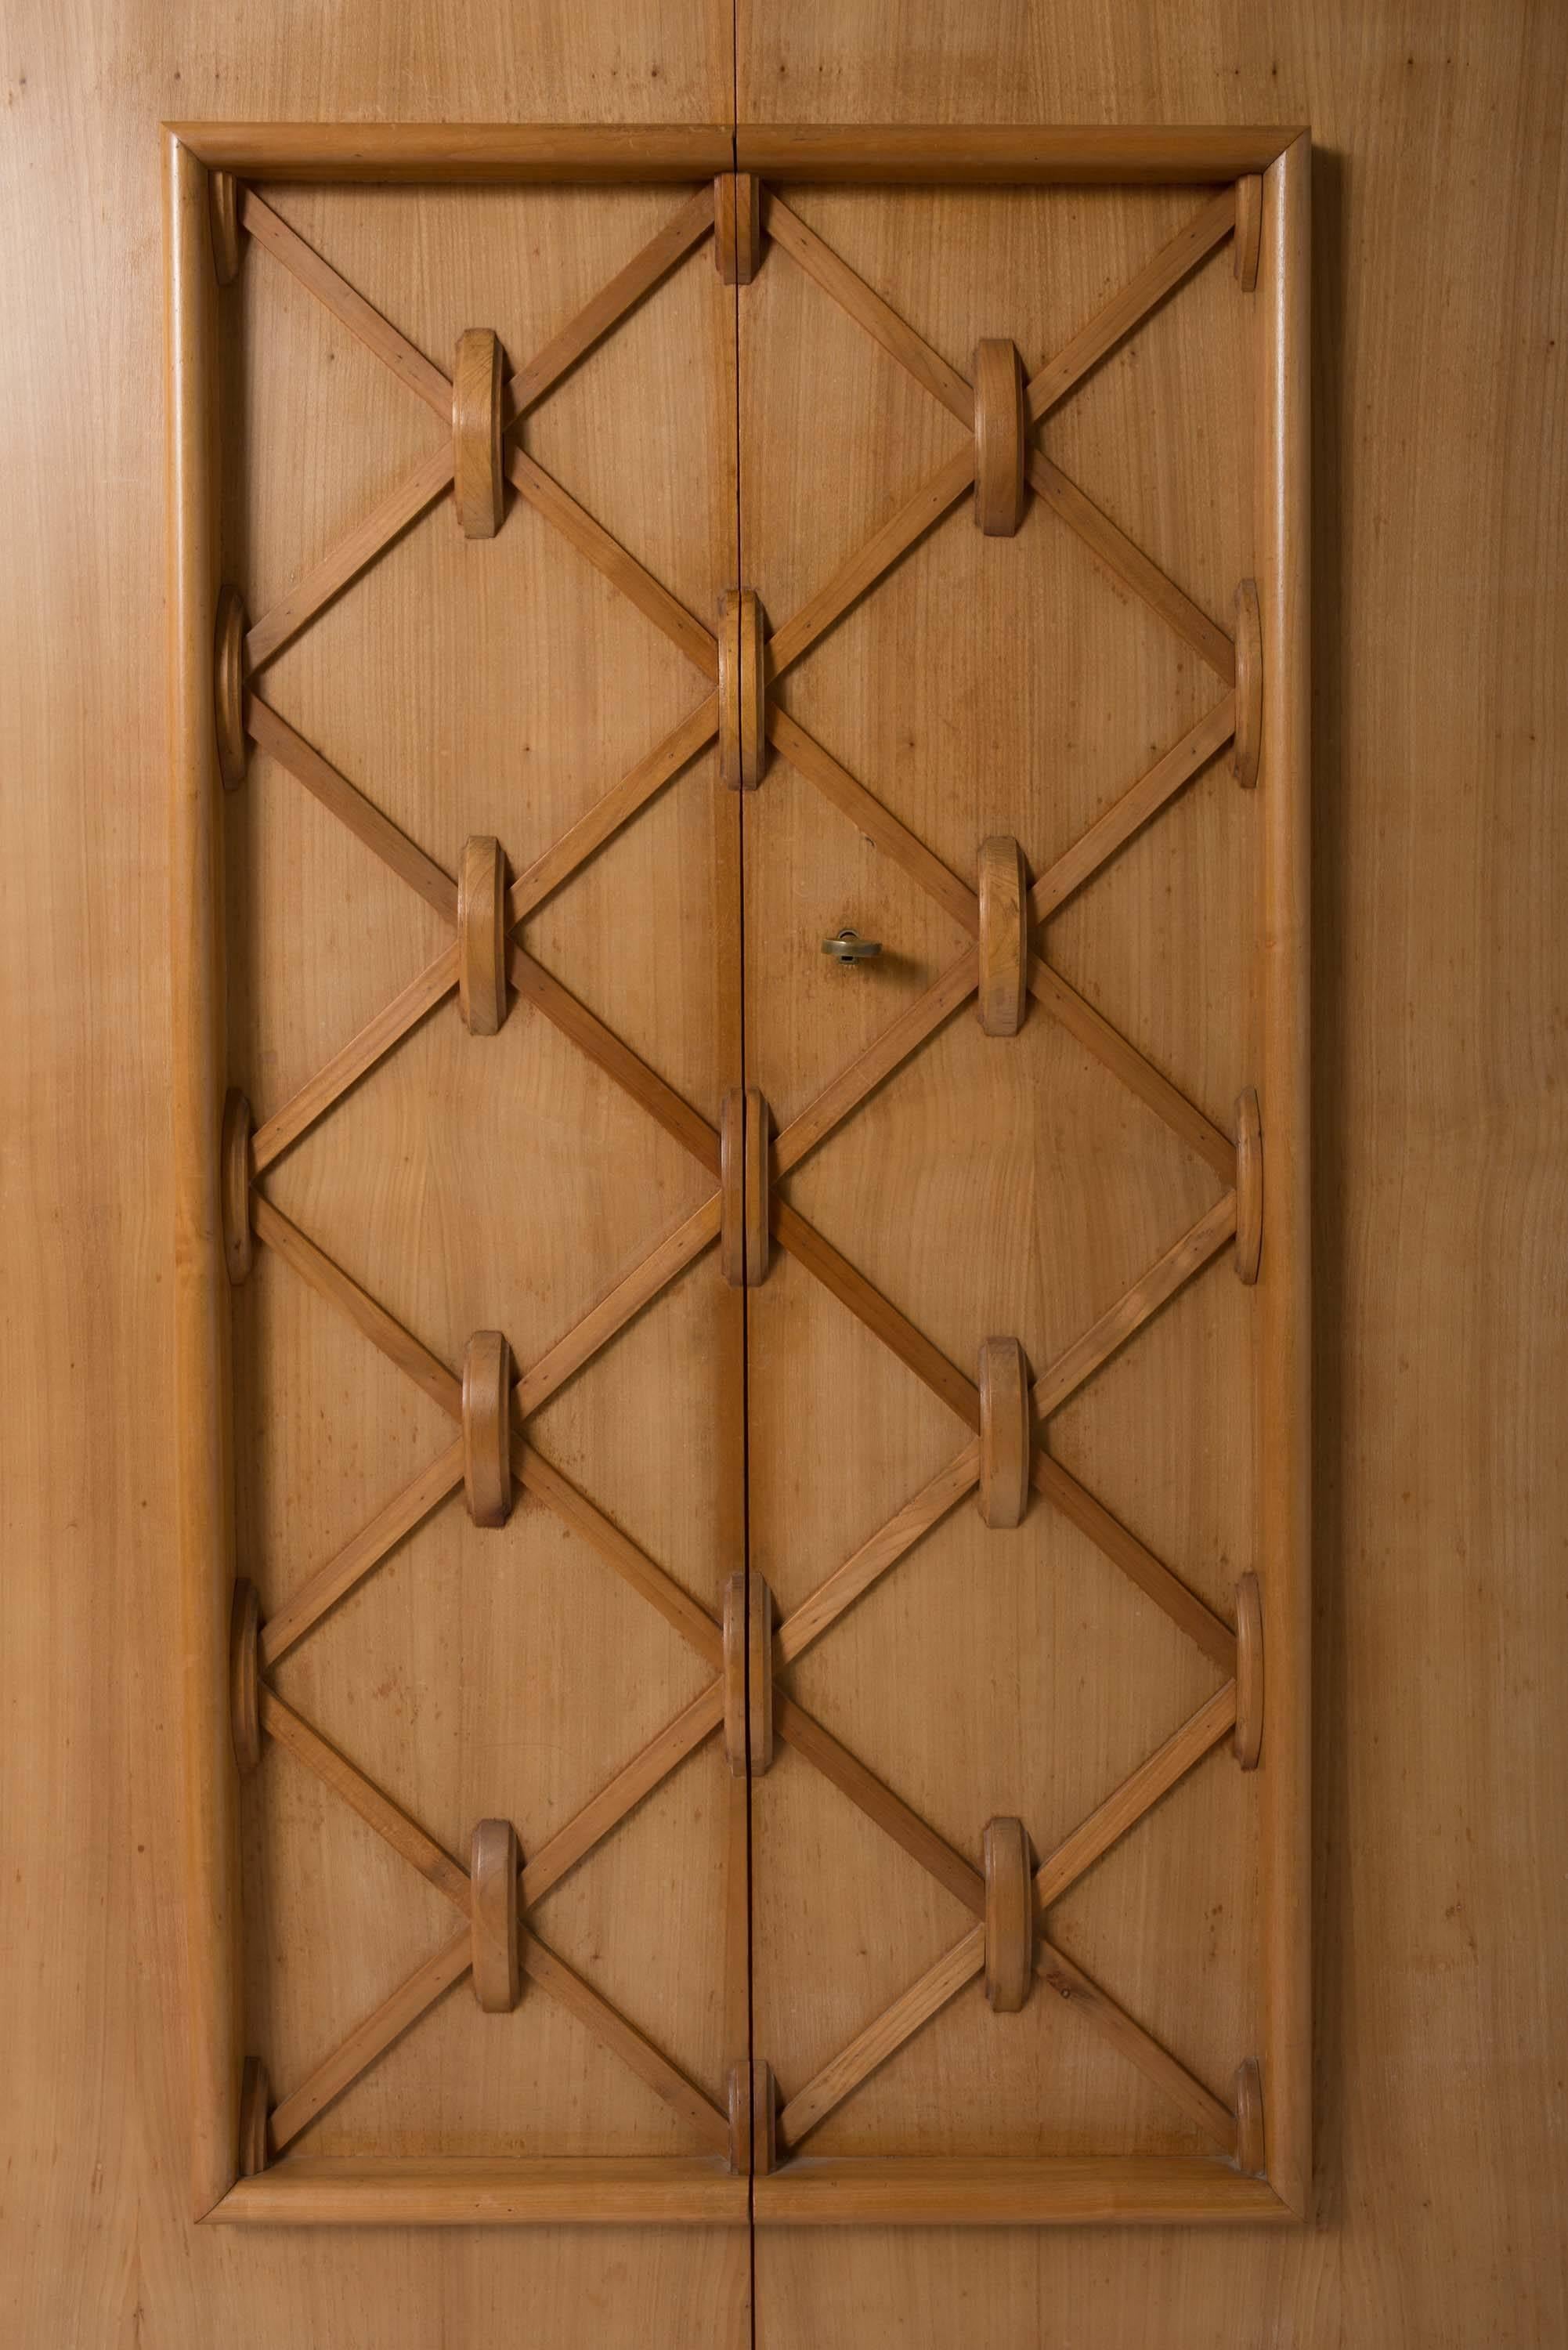 A French cherrywood cupboard of elegant shape with central geometrical design,
France, circa 1950.
Measures: 175 cm high x 150 cm wide x 50 cm deep.